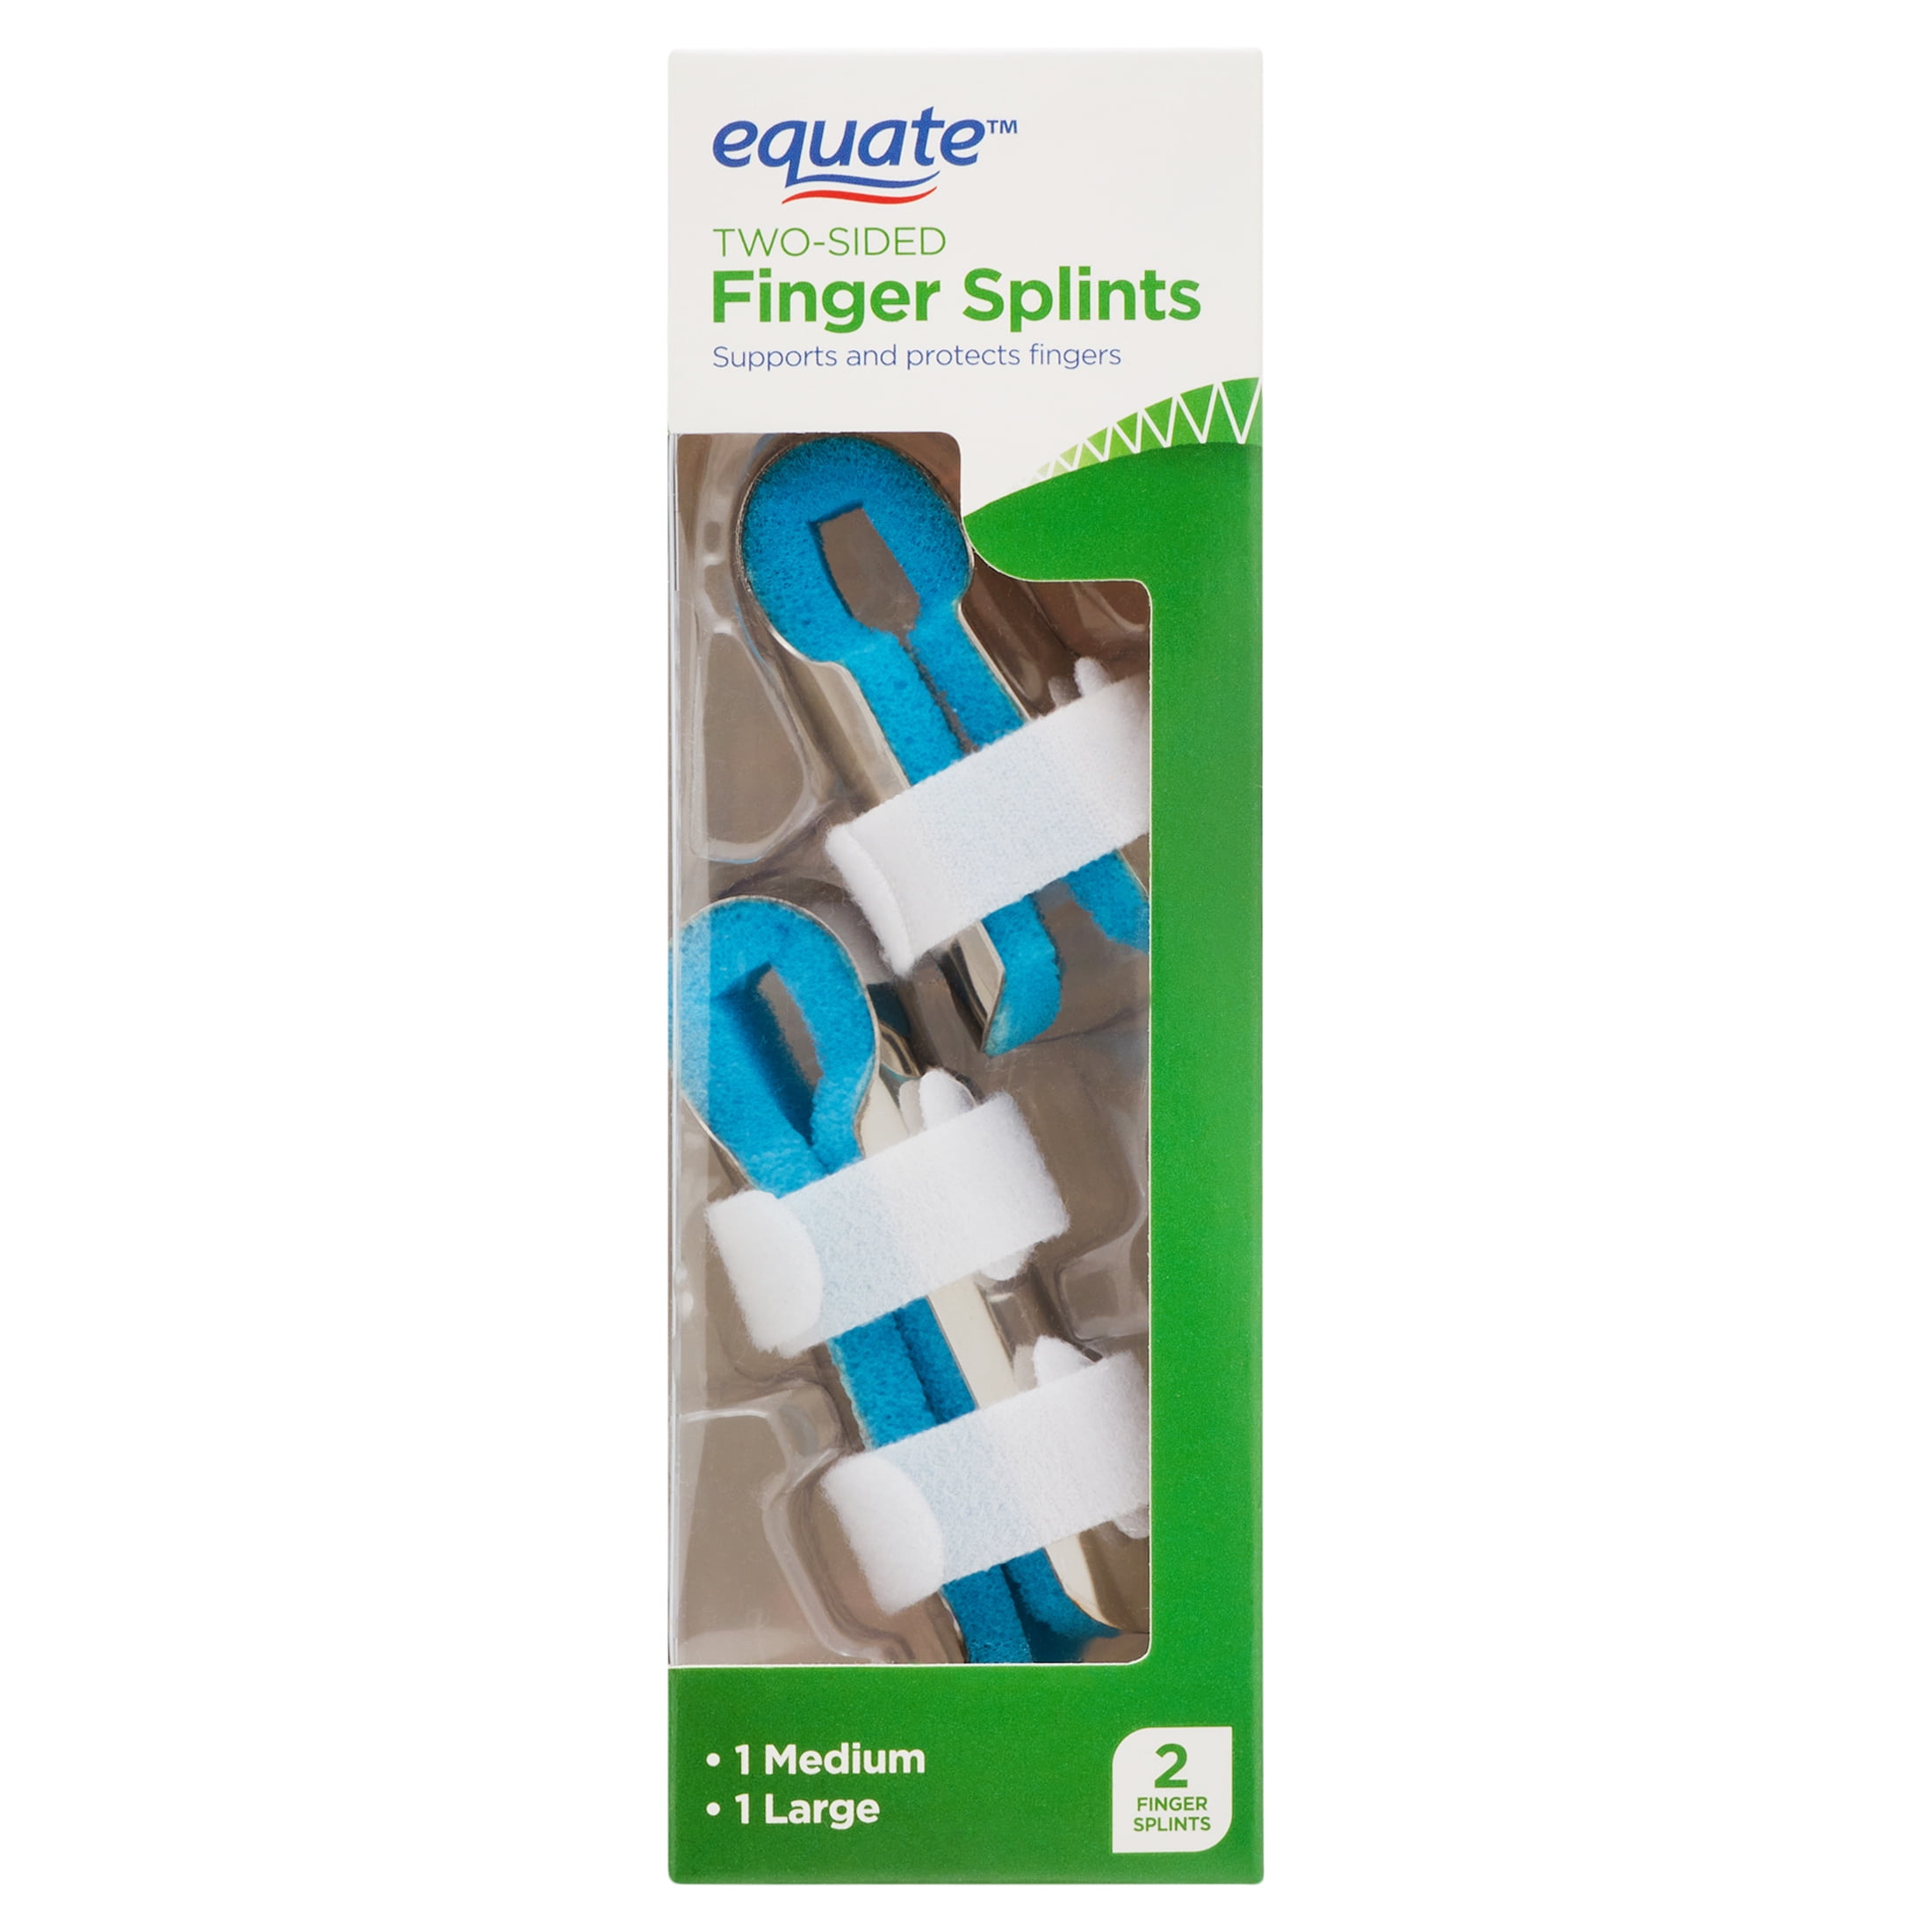 Equate Two-Sided Finger Splints, 2 Count